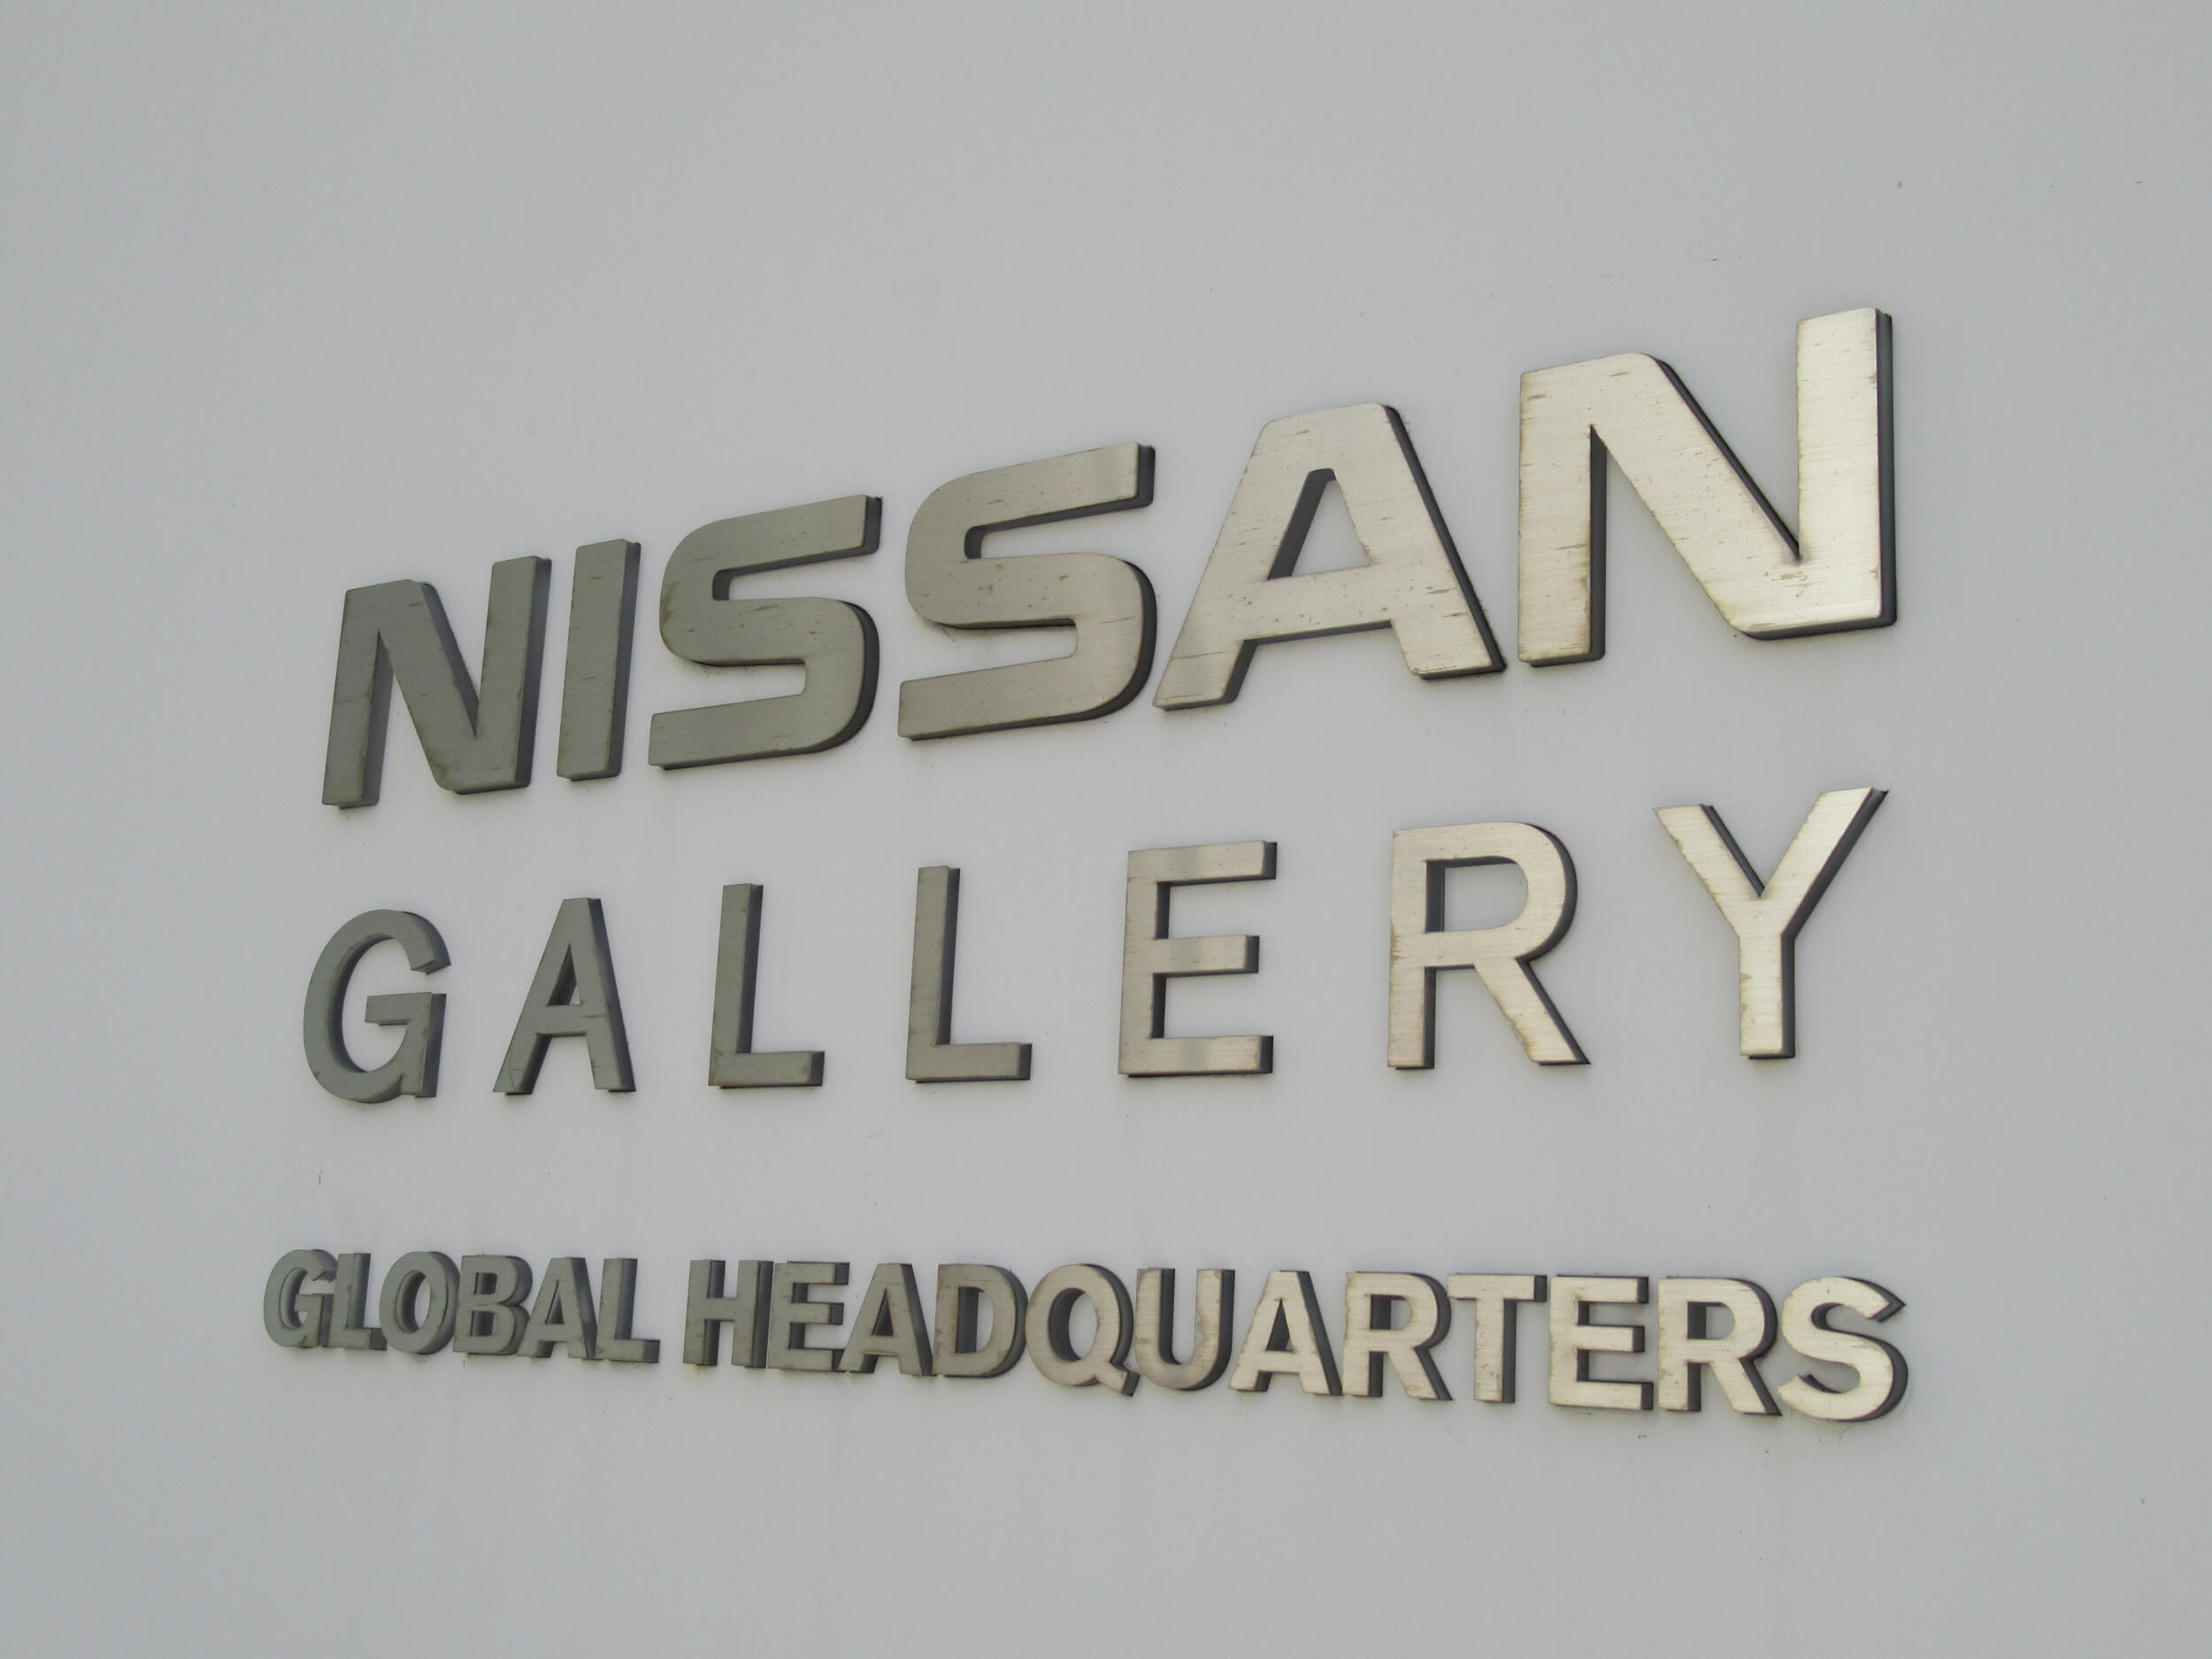 Nissan's global headquarters・sign